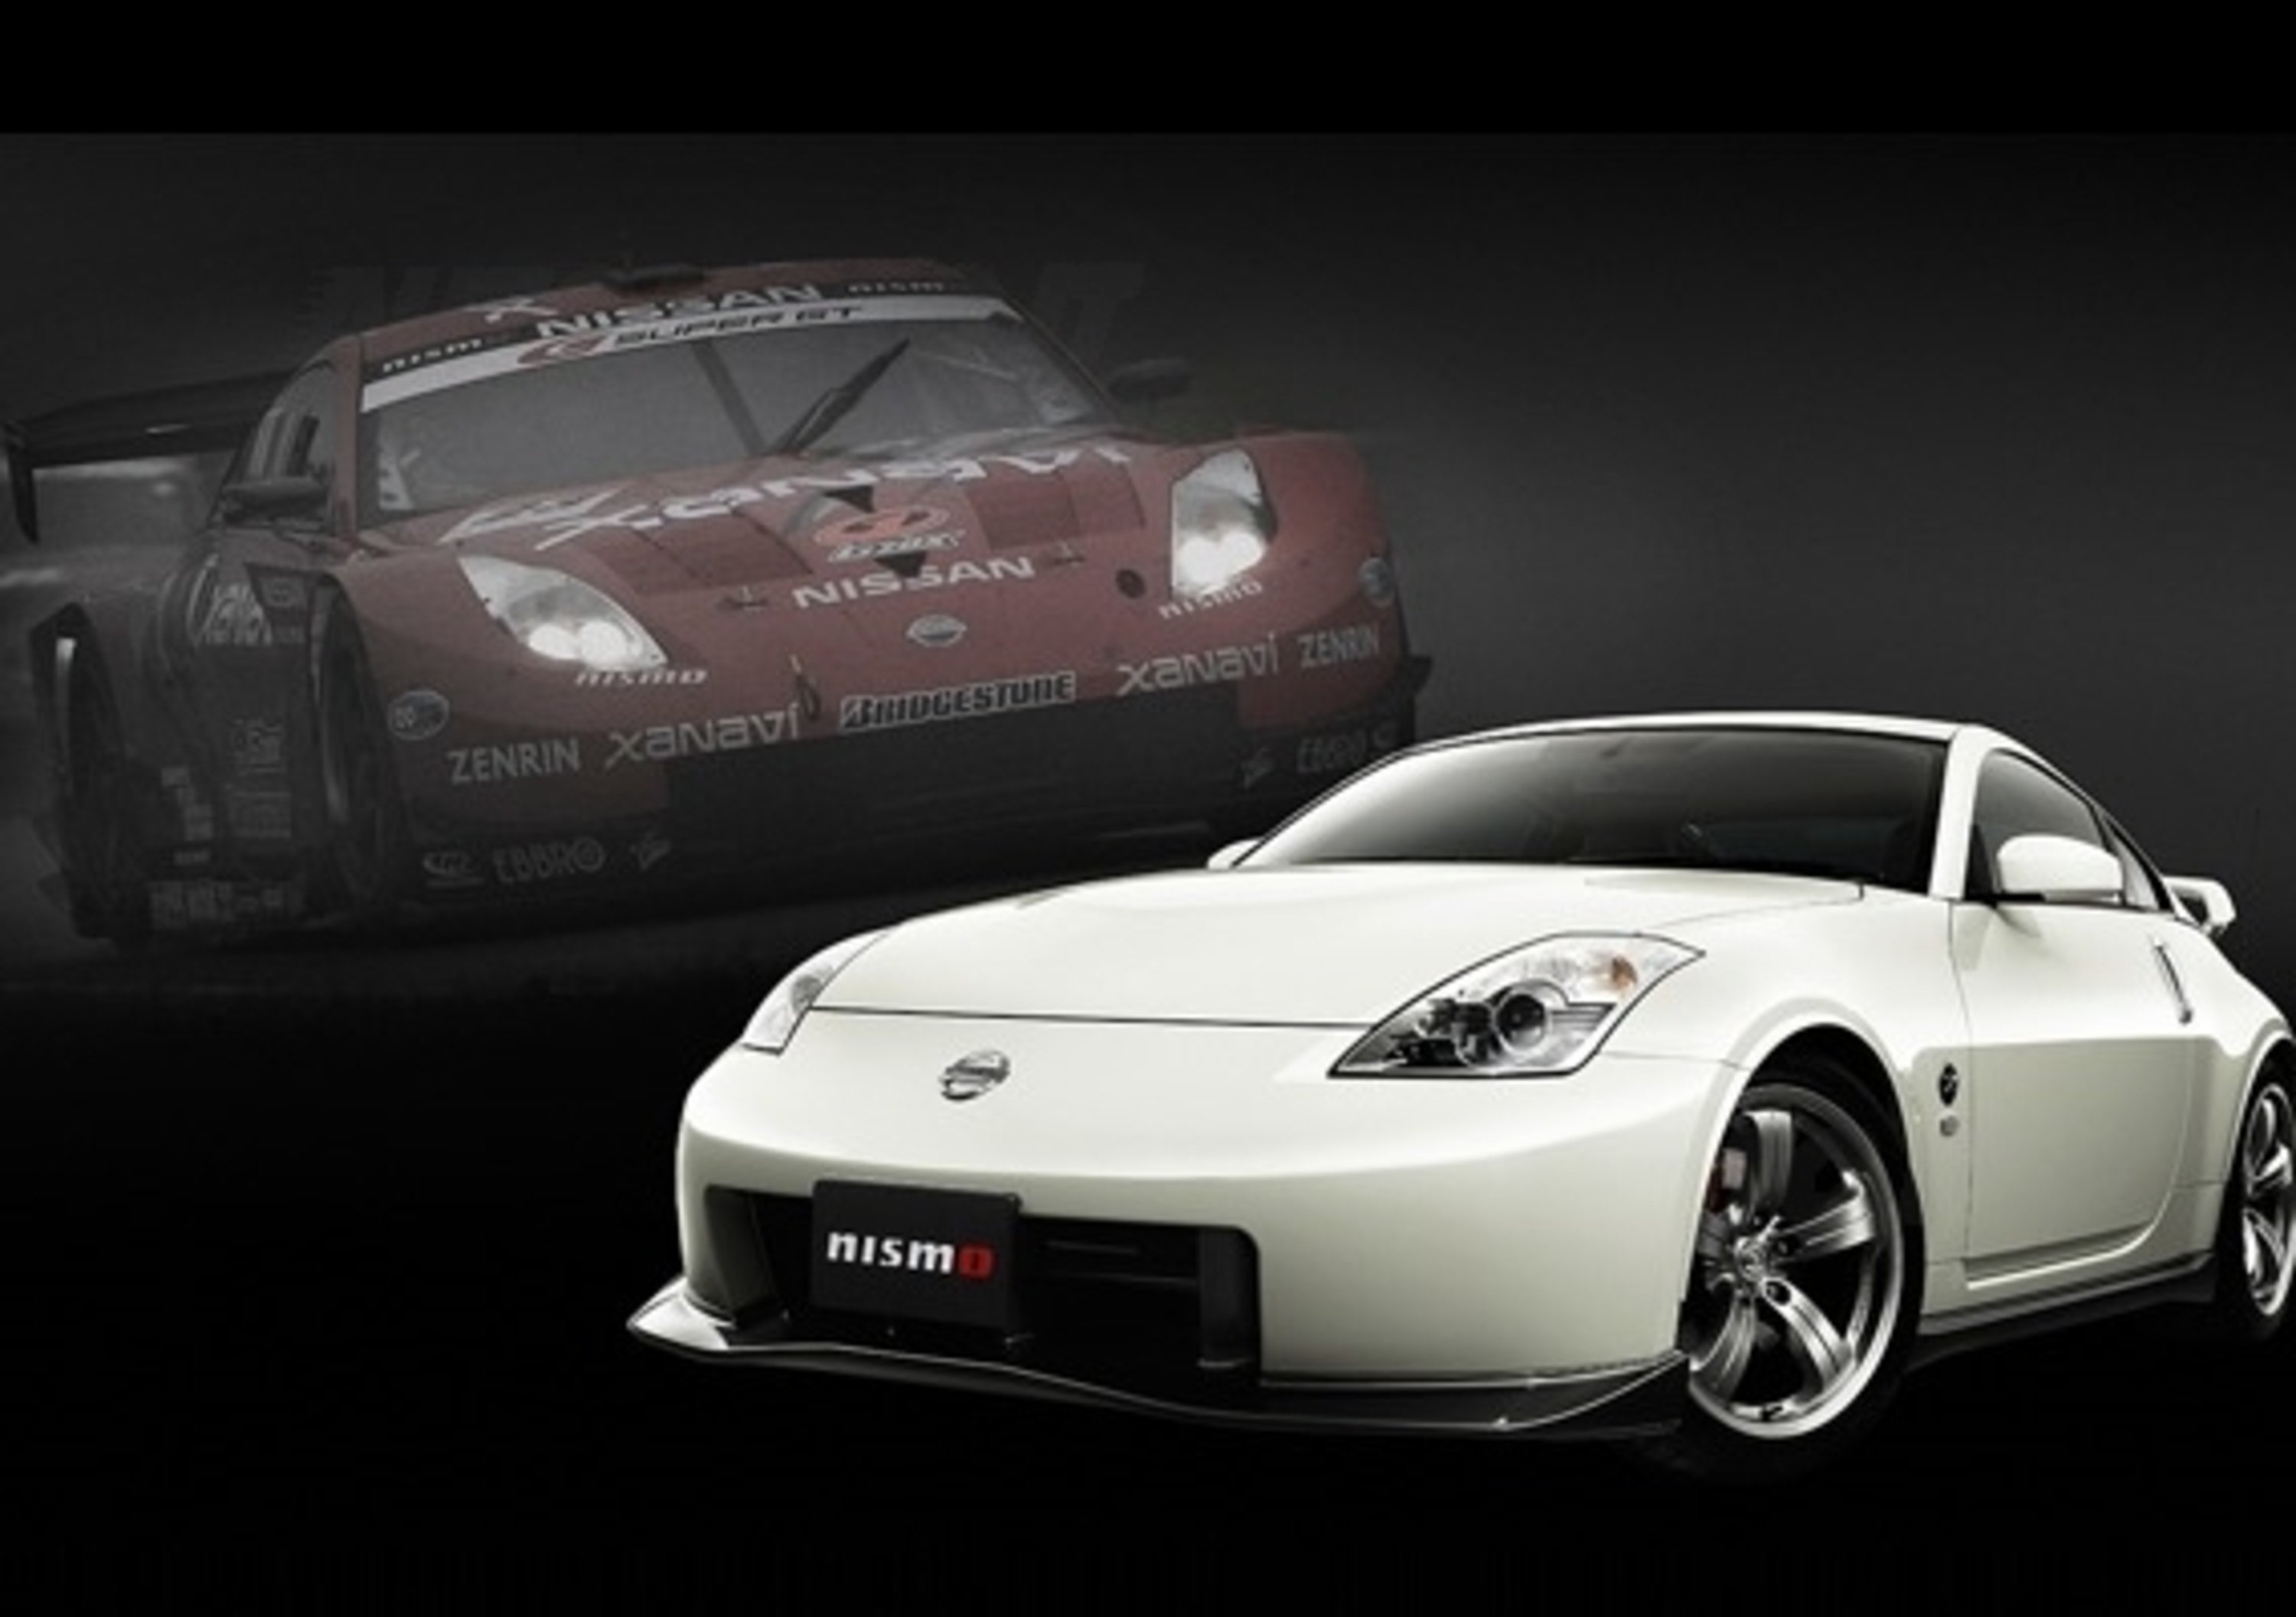 Nissan Fairlady Z 380RS Nismo